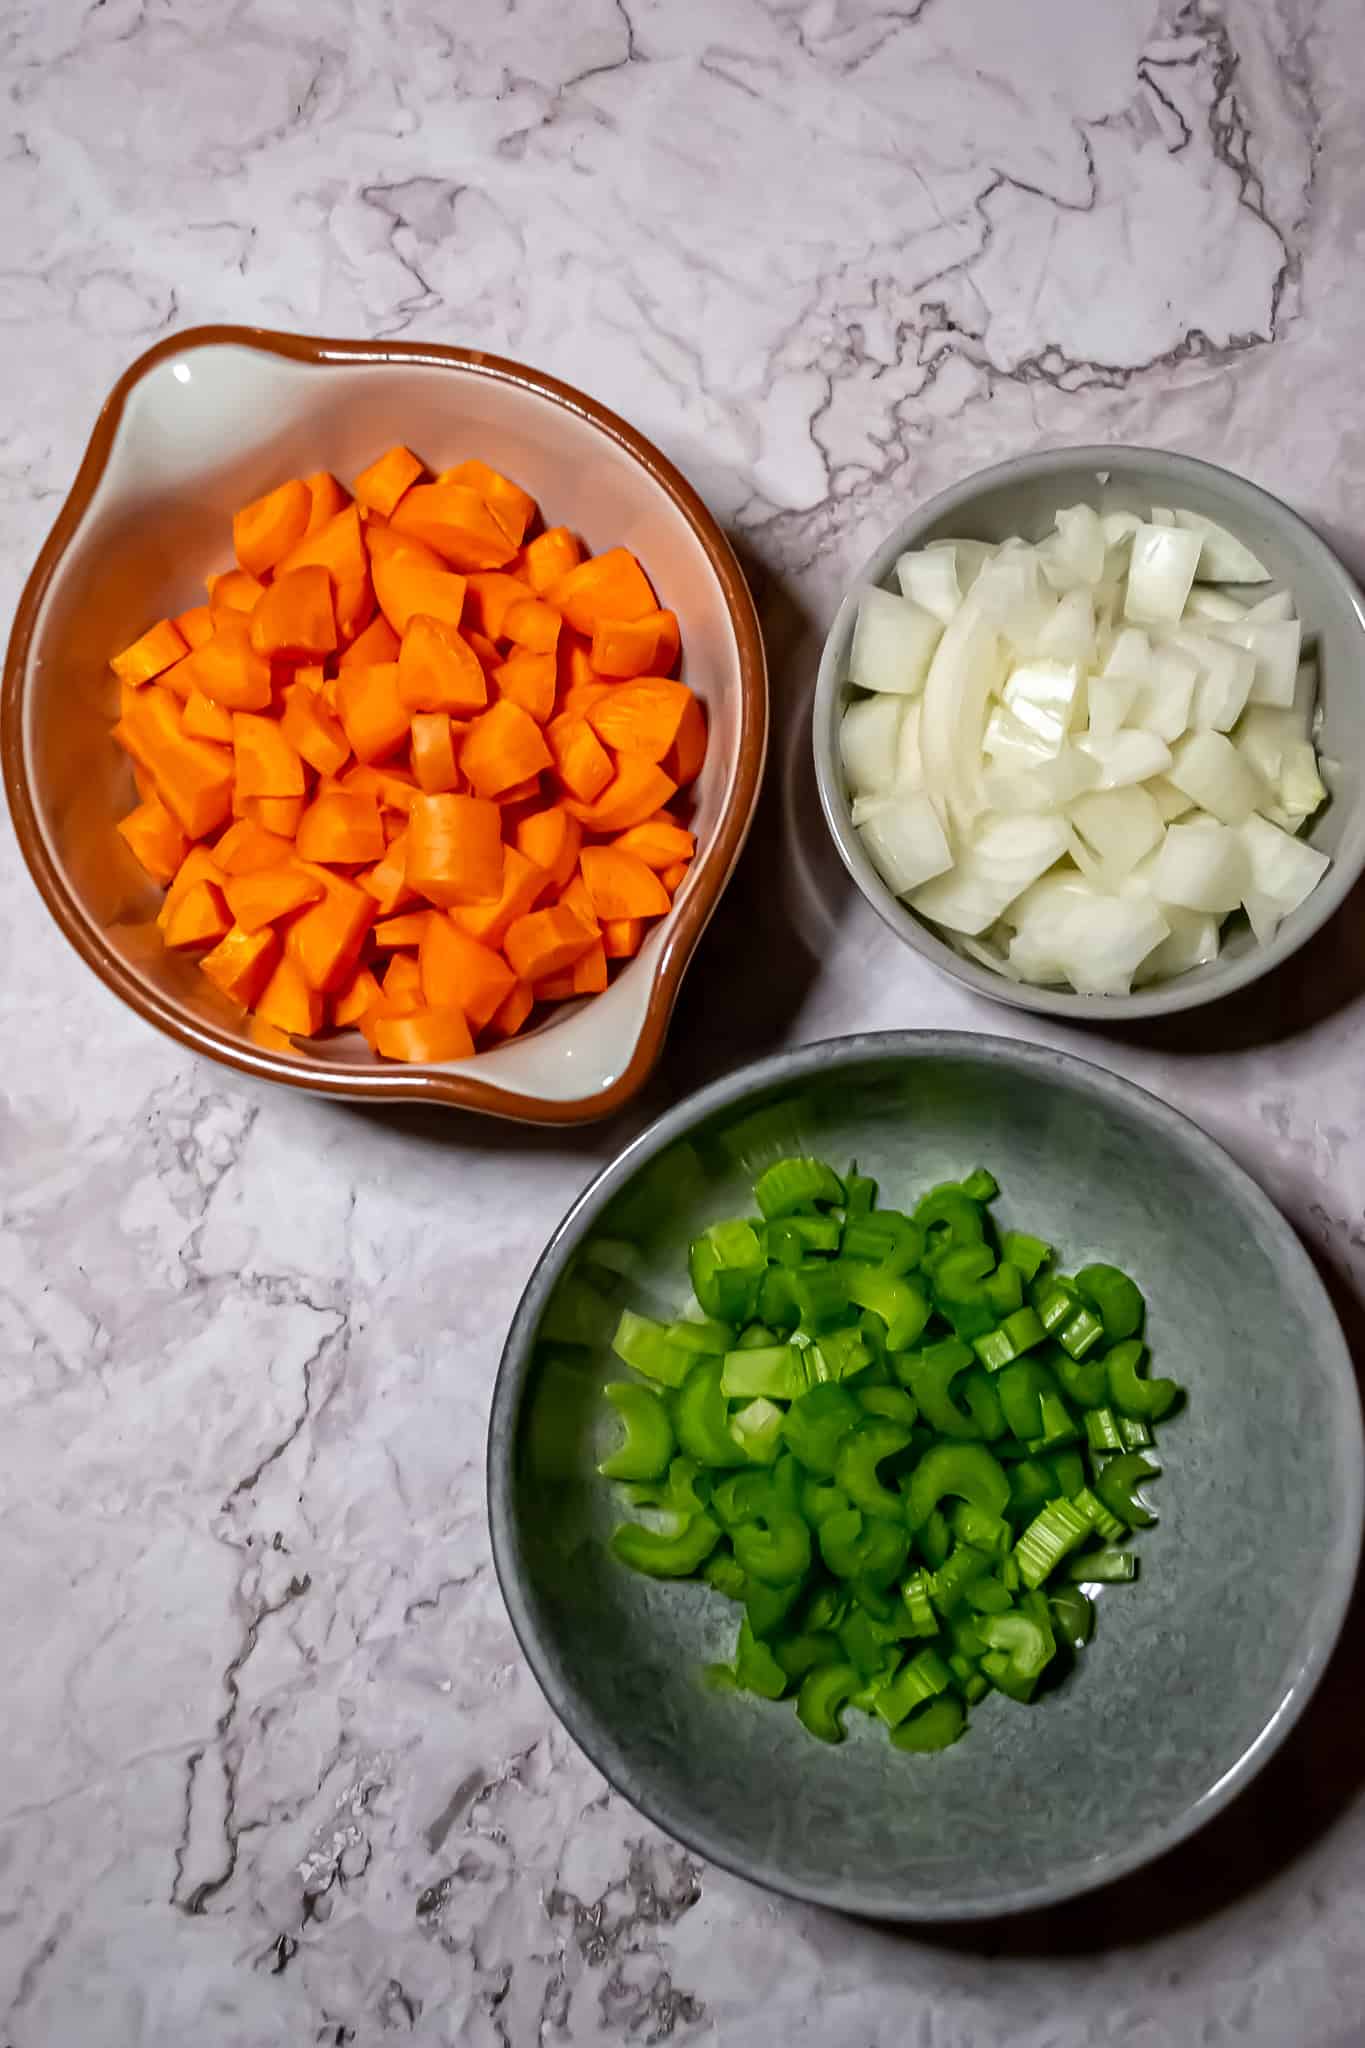 Top view of a bowl of carrots, a bowl of diced onions, and a bowl of sliced celery